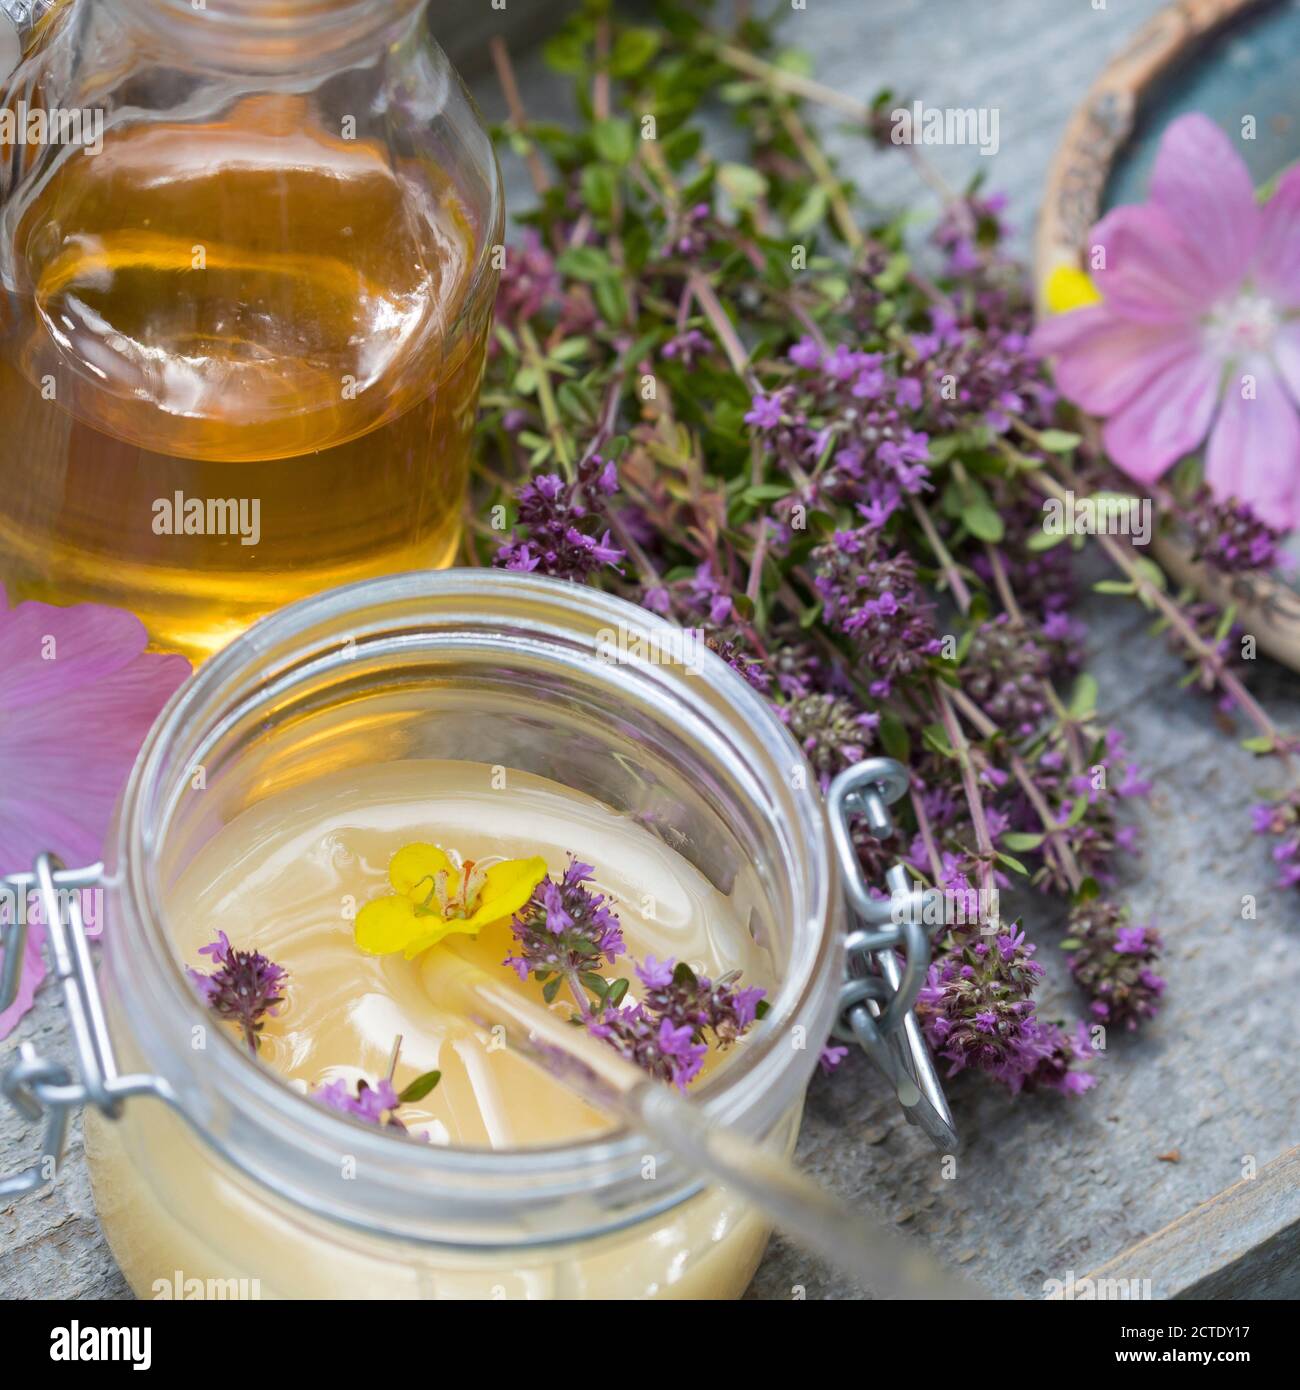 Broad-Leaved Thyme, Dot Wells Creeping Thyme, Large Thyme, Lemon Thyme, Mother of Thyme, Wild Thyme (Thymus pulegioides), Oxymel made of honey with Stock Photo